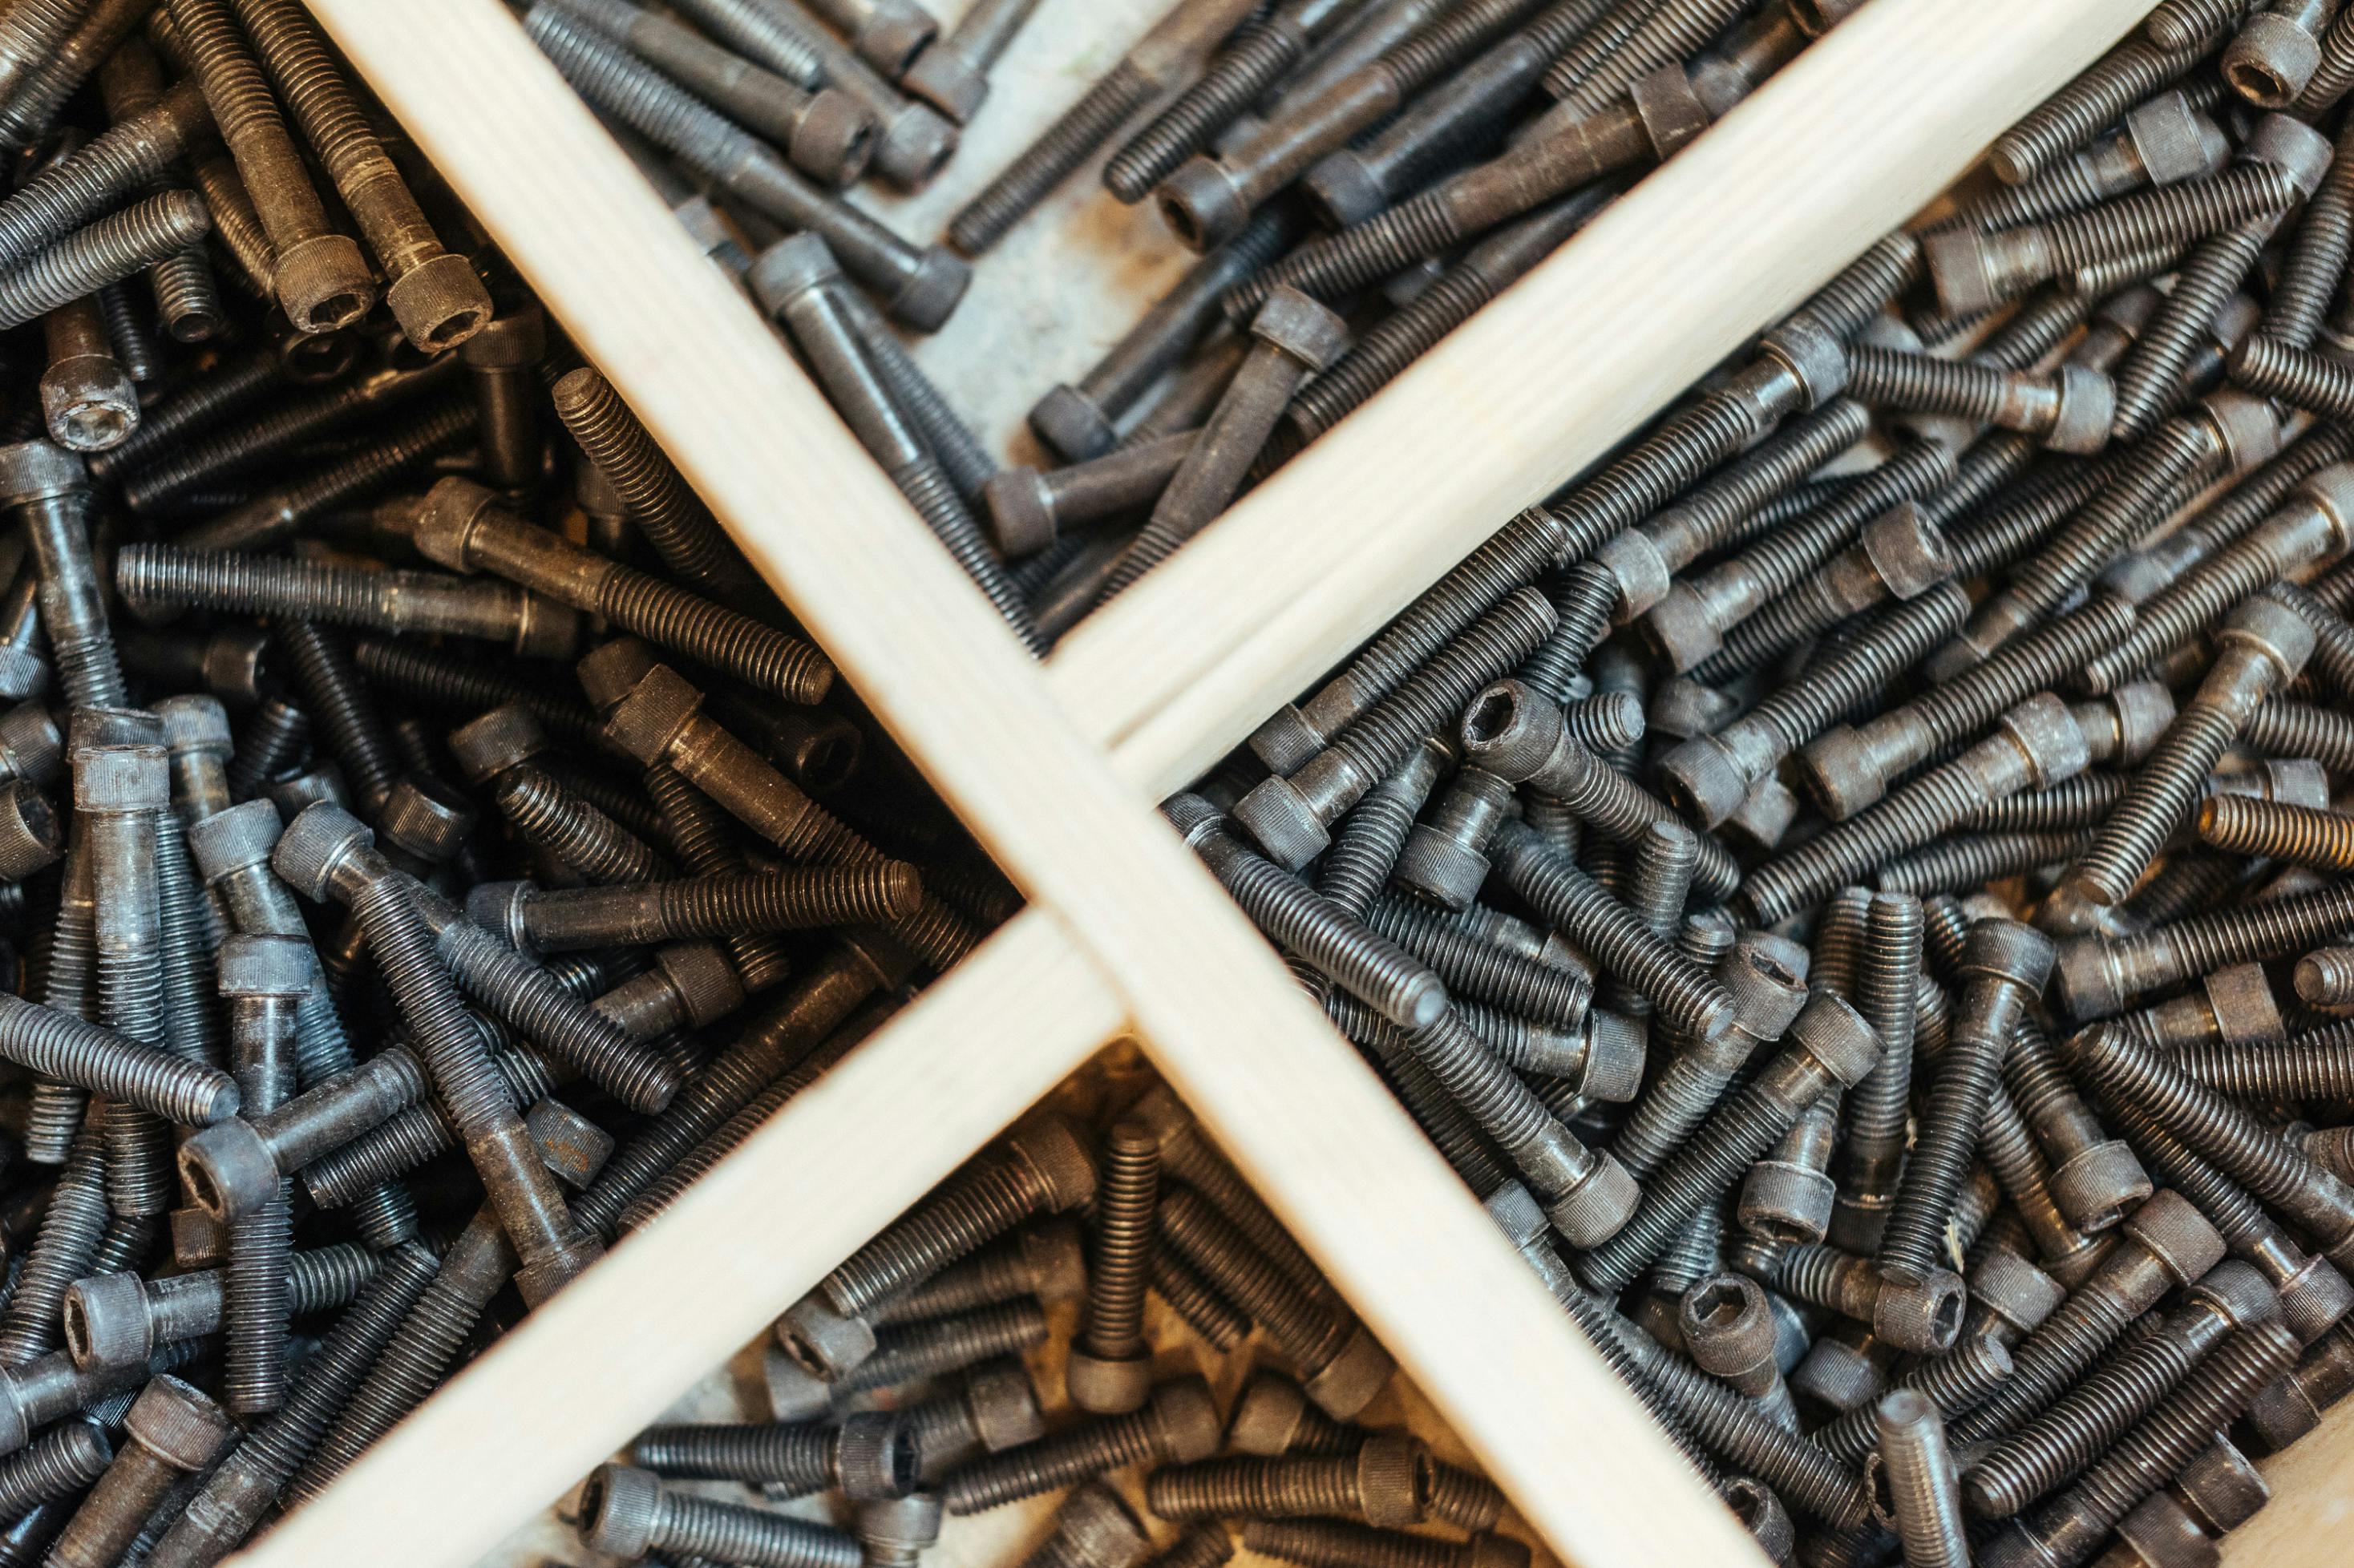 Climbing bolts organized in trays